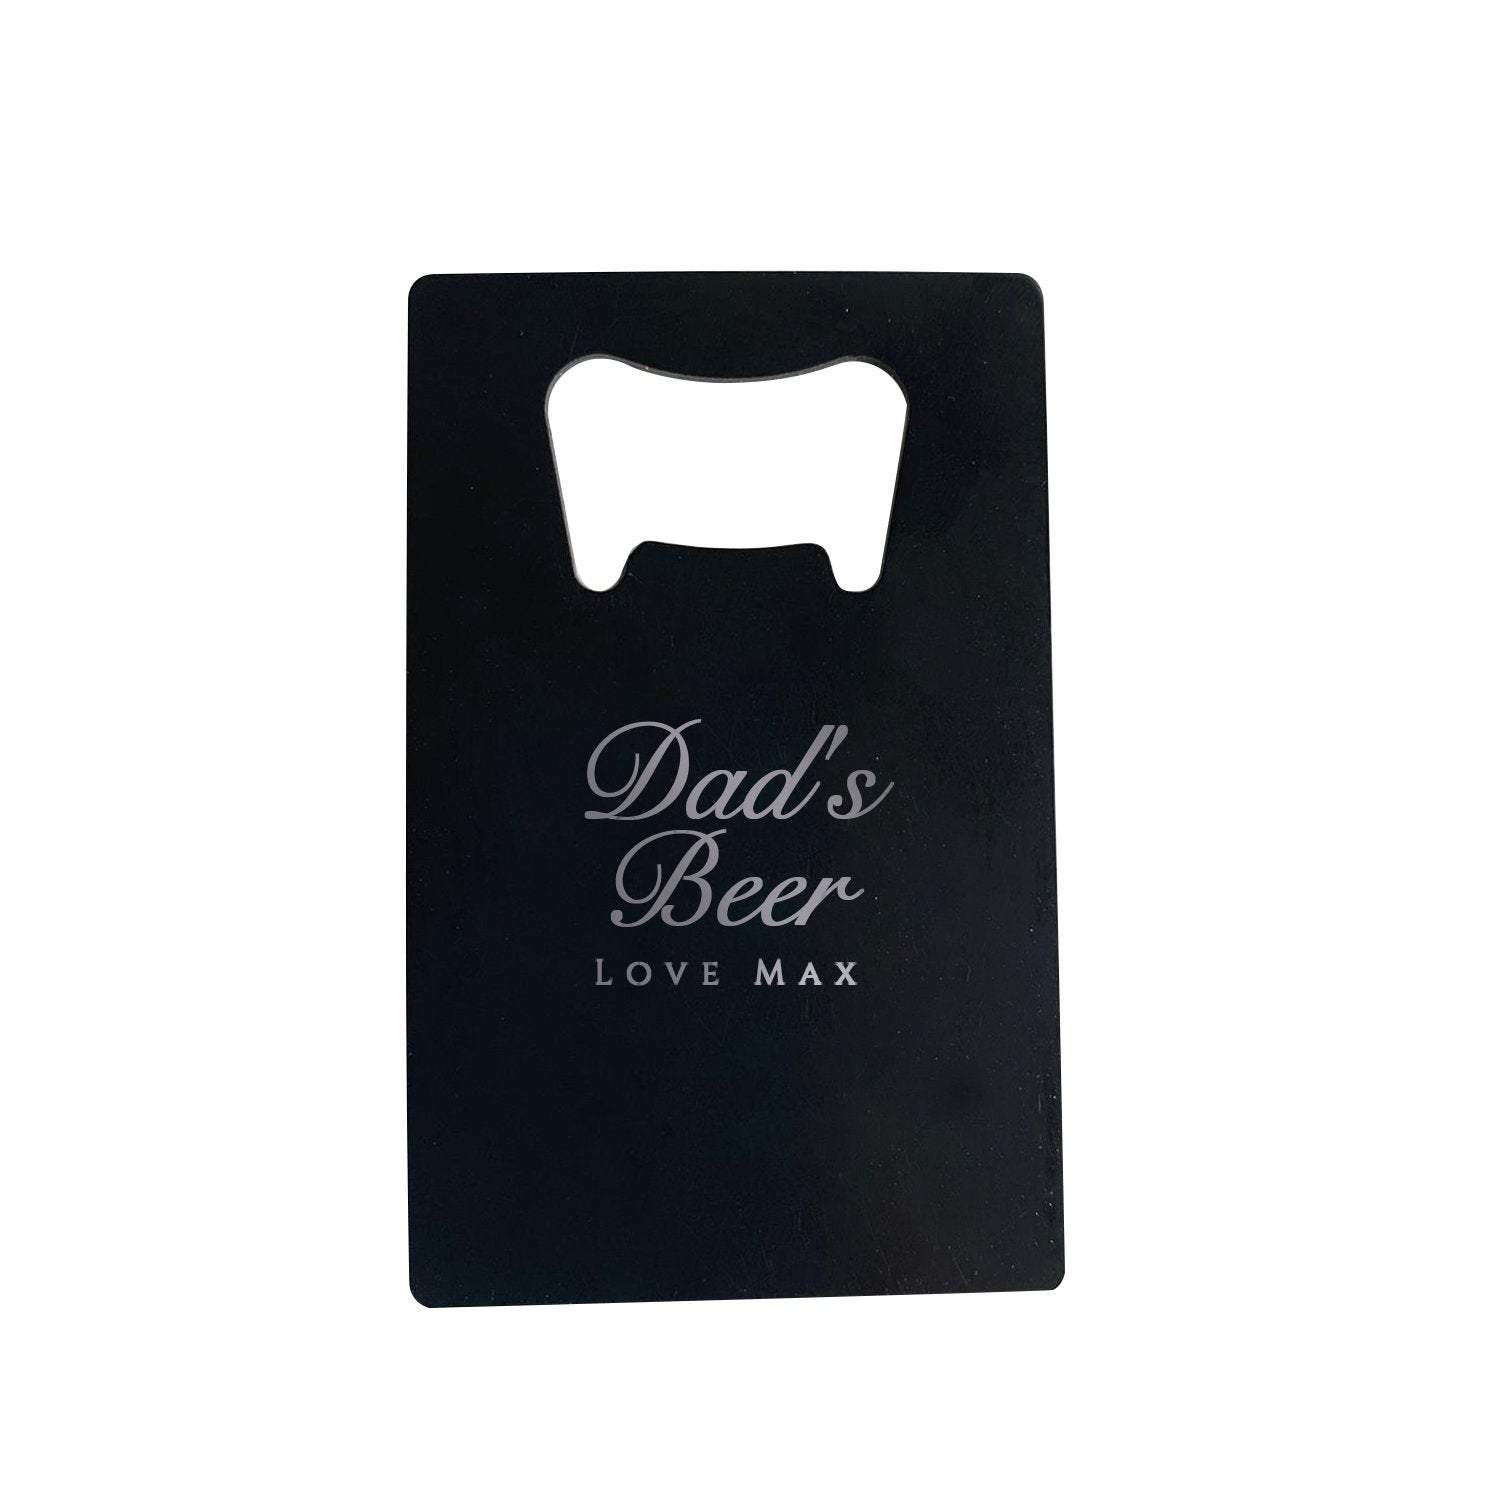 Personalised engraved black stainless steel bottle opener, Gift for dad, Father's Day gift for daddy